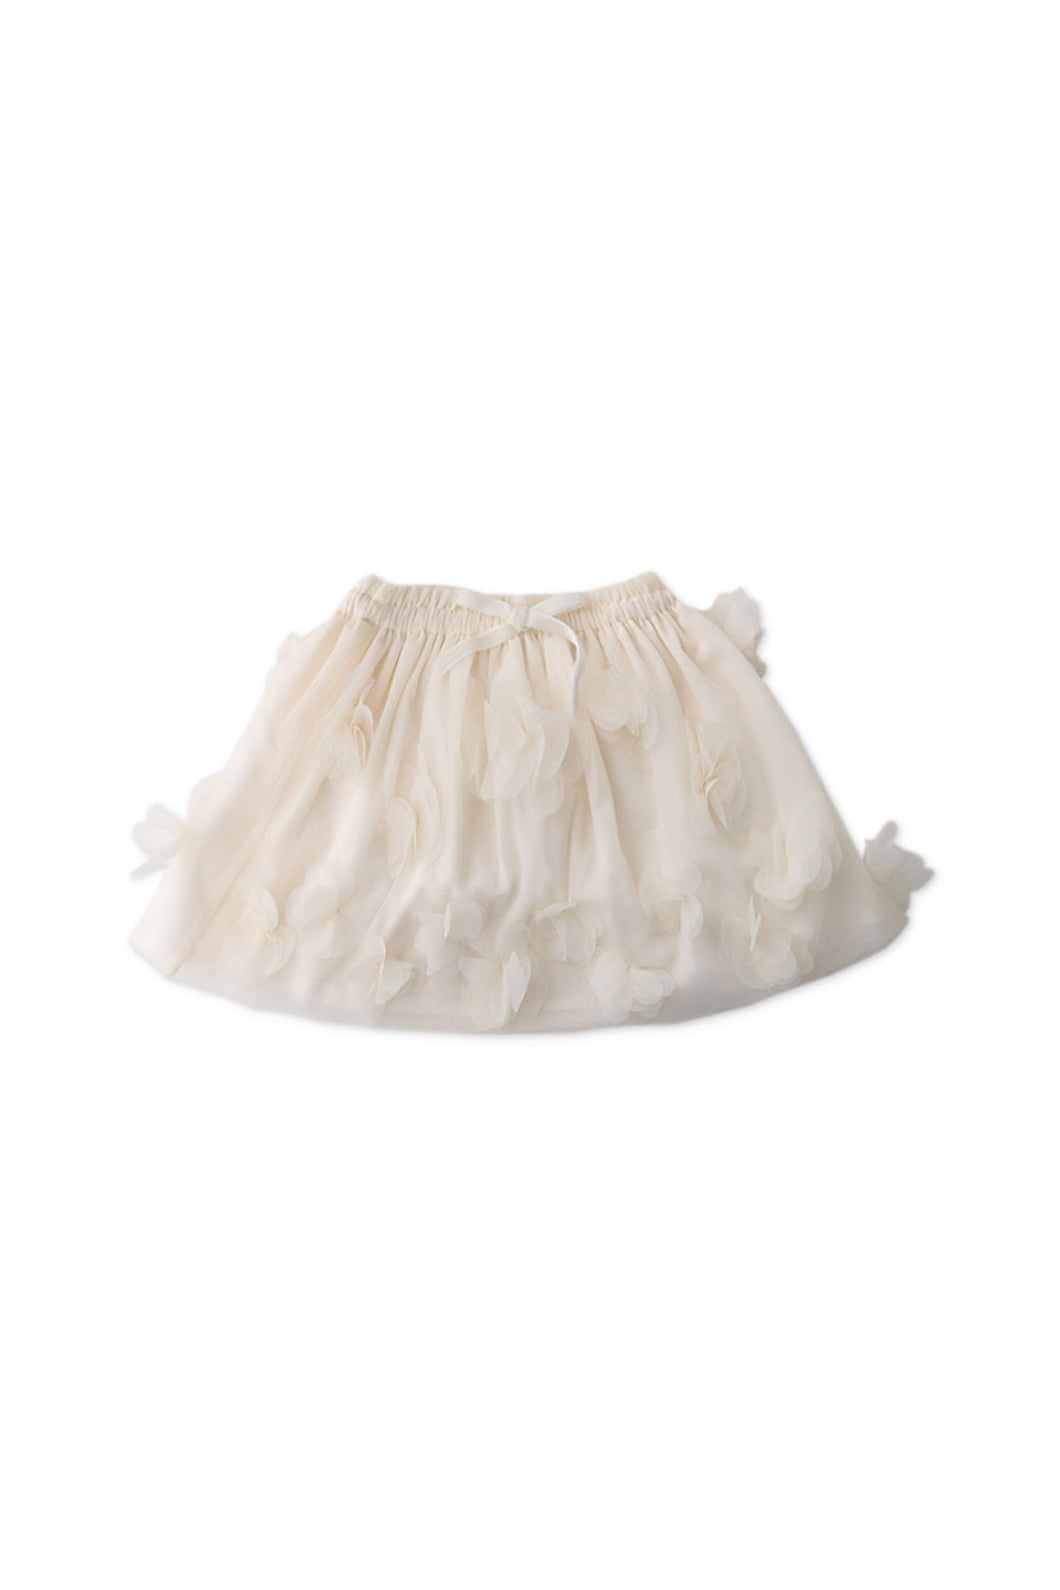 Gingersnaps Tulle Skirt with Flower Applique